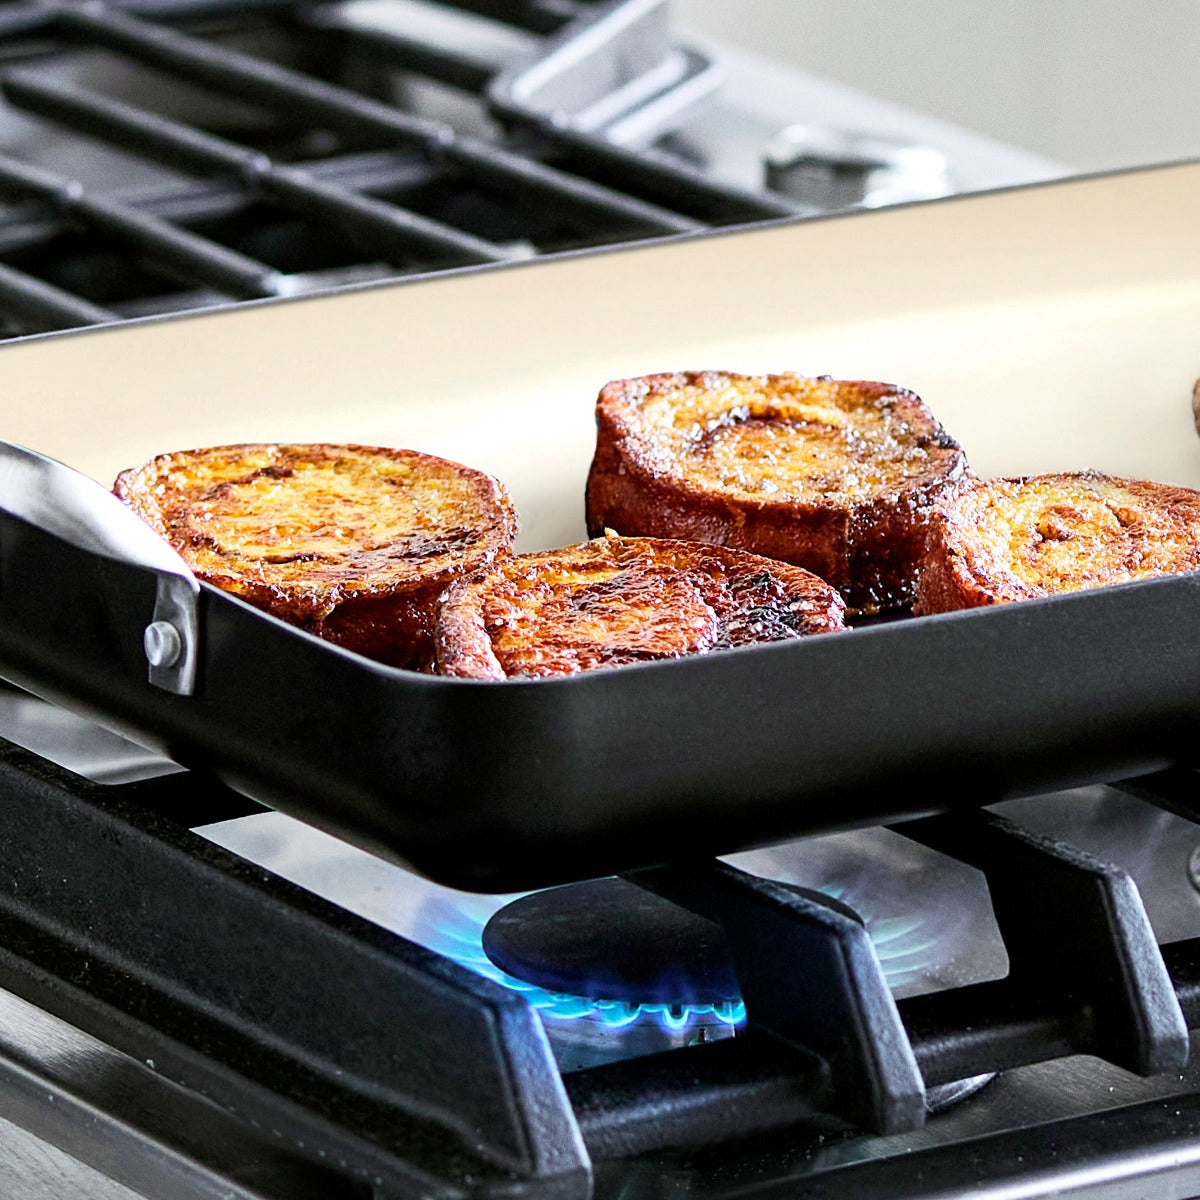 How Do You Use a Griddle on a Gas Stove?